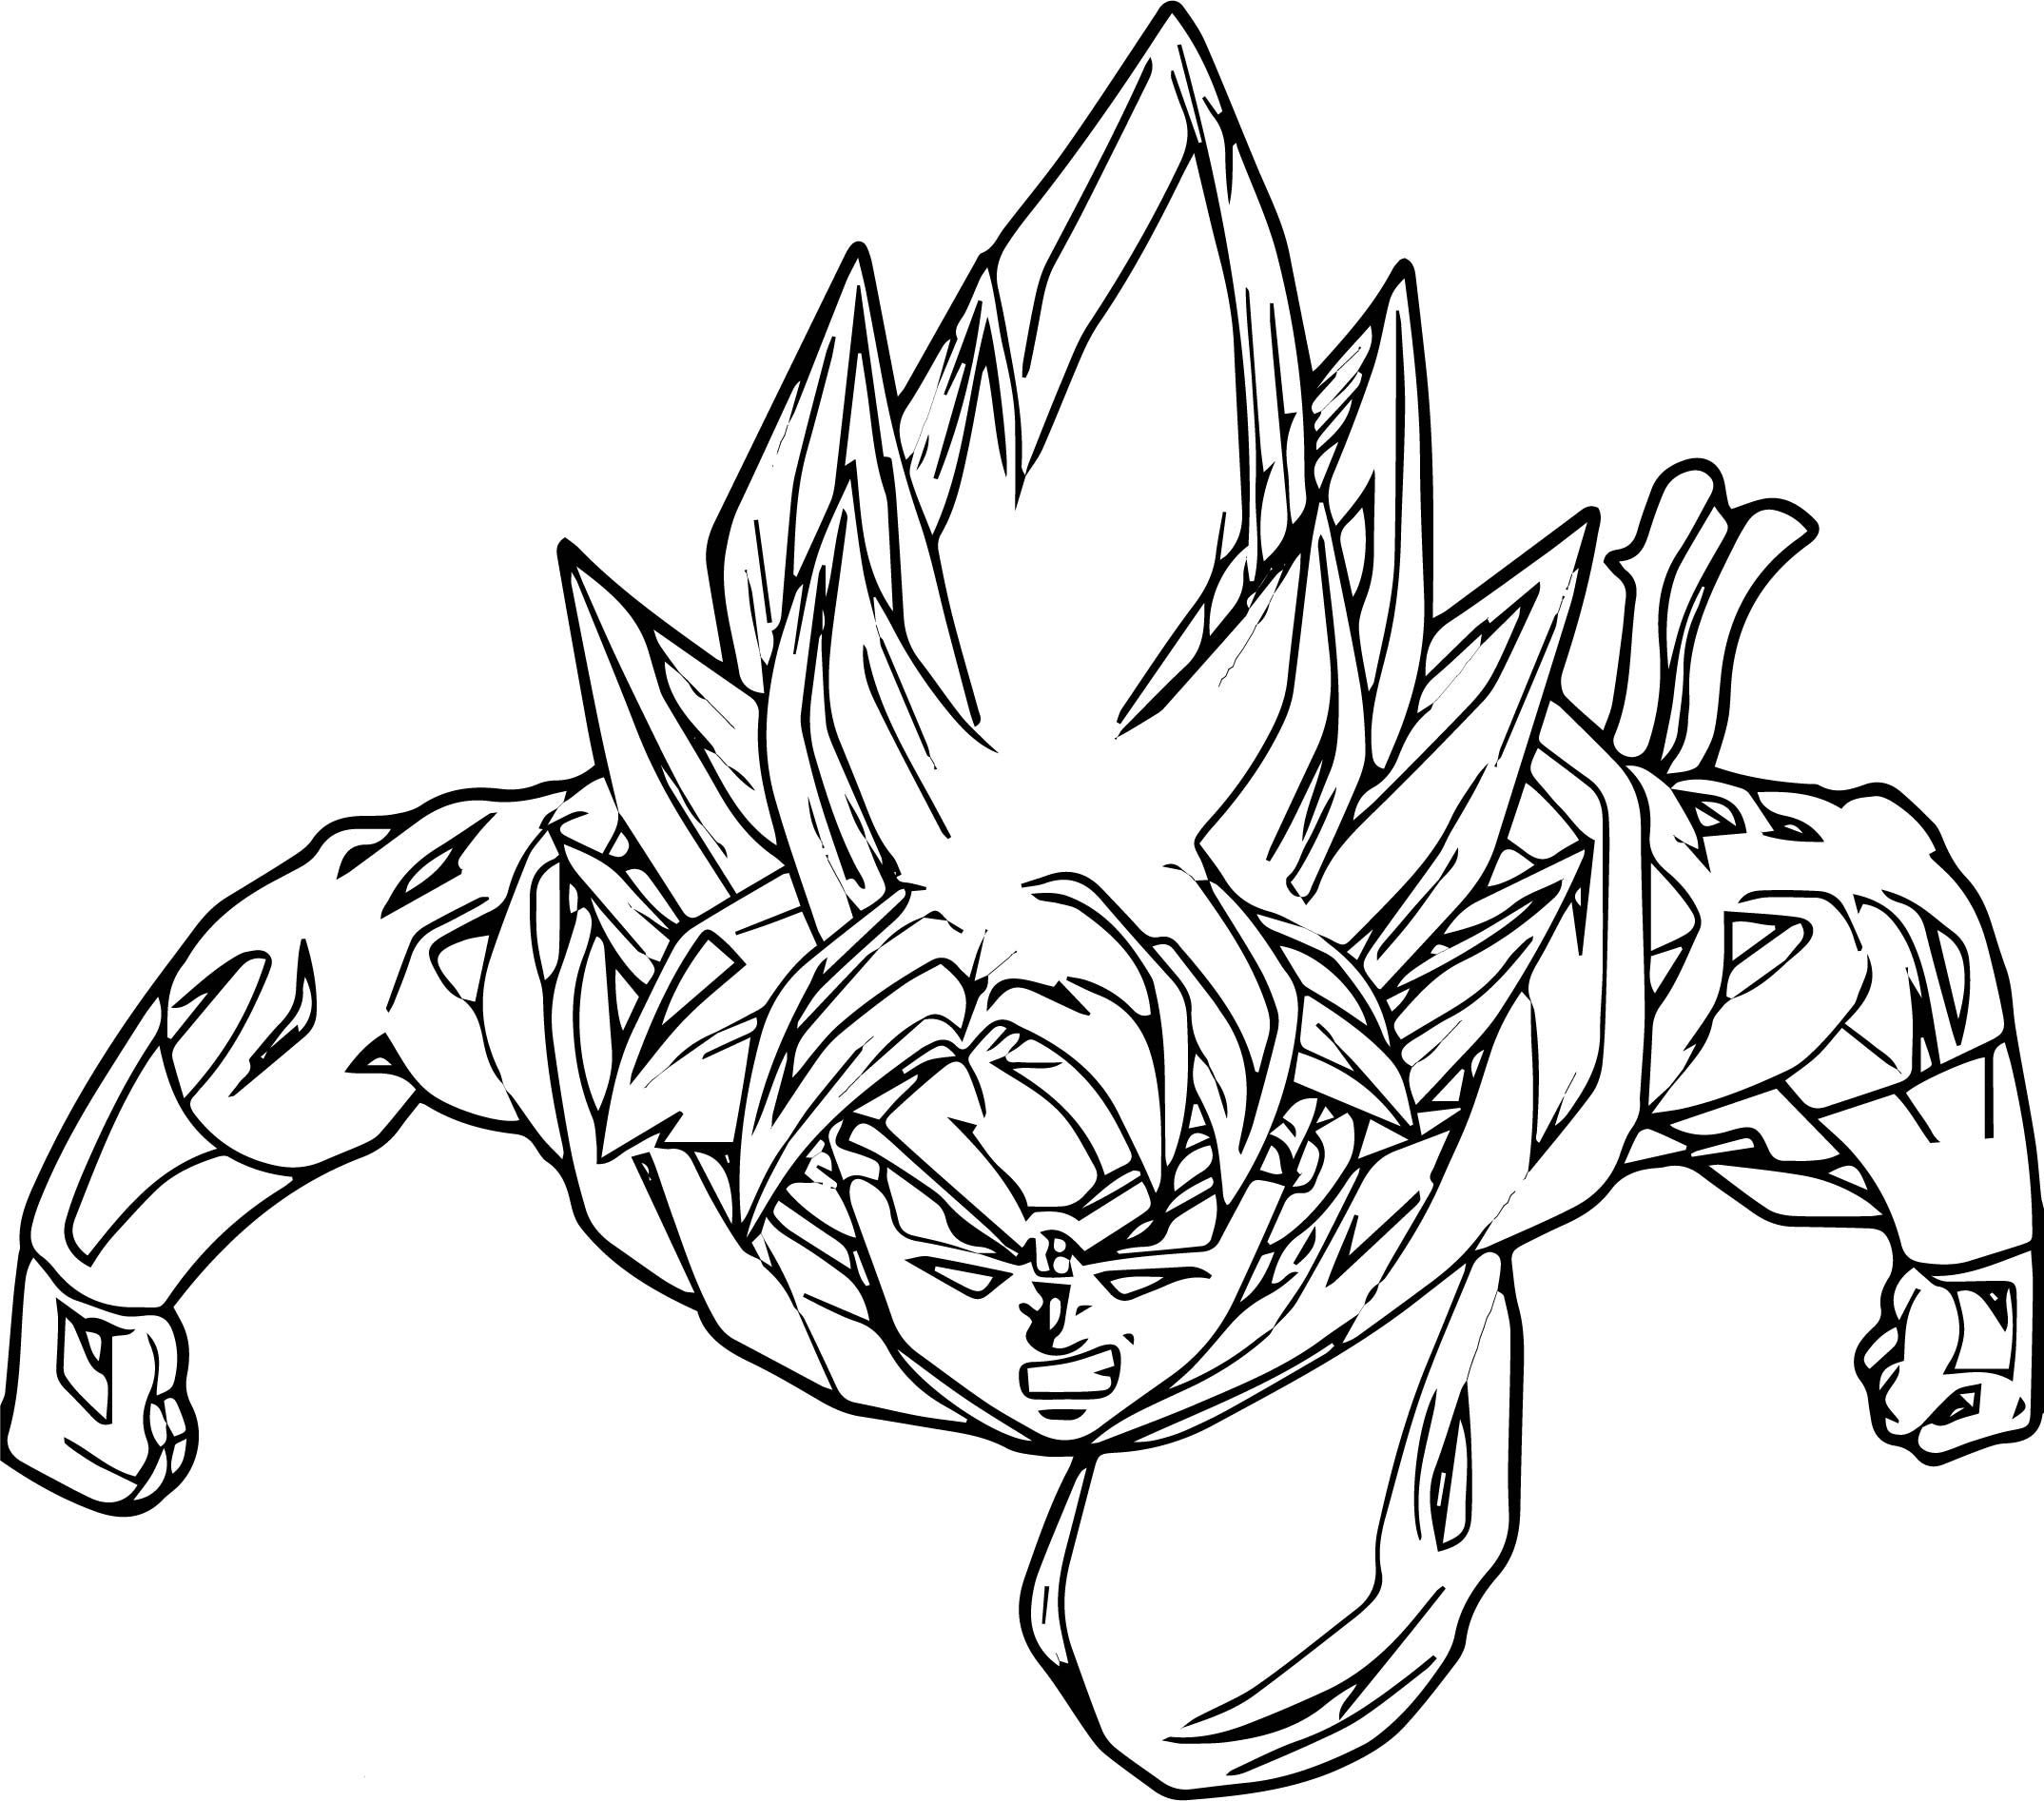 Goku Coloring Pages Ssjb - Coloring and Drawing